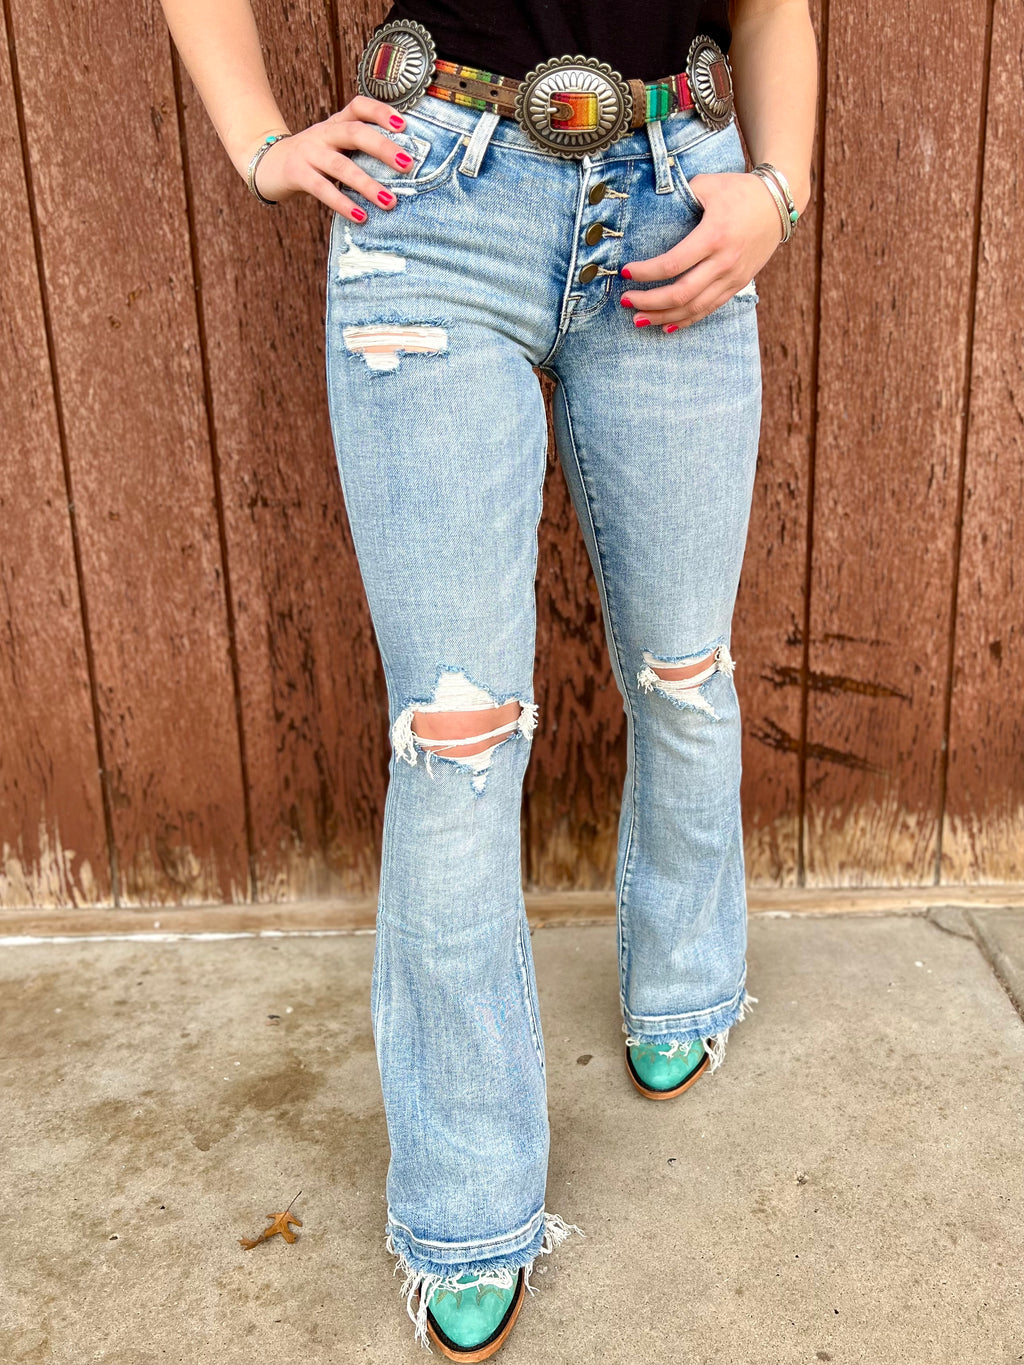 Stretchy Jeans. Button Fly. Light wash denim. Distressed. Frayed hem. Trending fashion. Boutique. Small business. Woman owned.